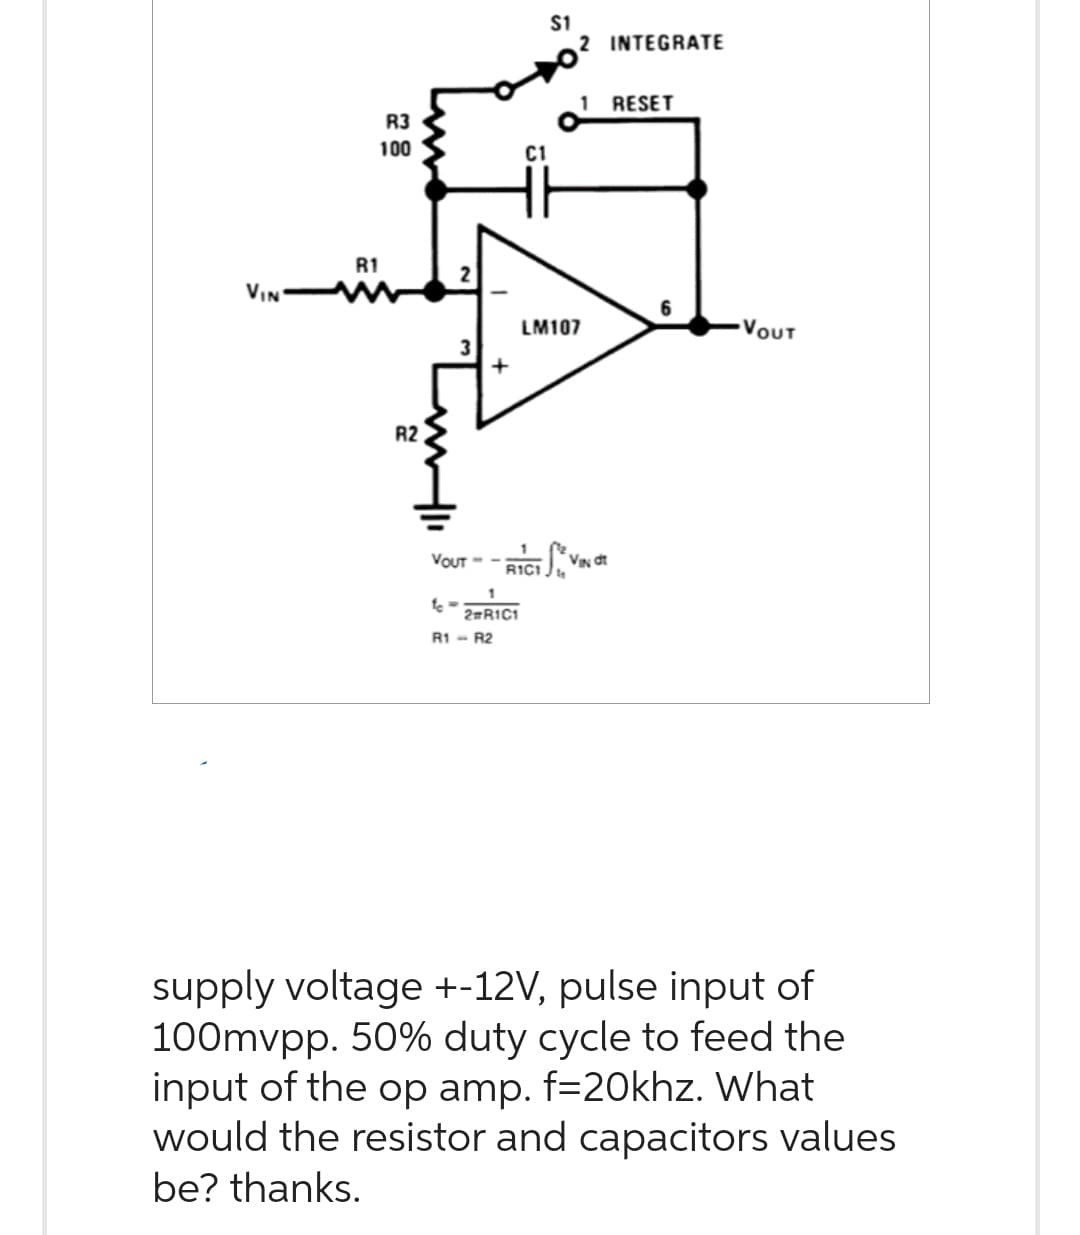 VIN
R3
100
R1
R2
+
VOUT --
C1
1
2#R1C1
R1 - R2
$1
R1C1 Ju
2 INTEGRATE
1
LM107
VIN dt
RESET
6
VOUT
supply voltage +-12V, pulse input of
100mvpp. 50% duty cycle to feed the
input of the op amp. f=20khz. What
would the resistor and capacitors values
be? thanks.